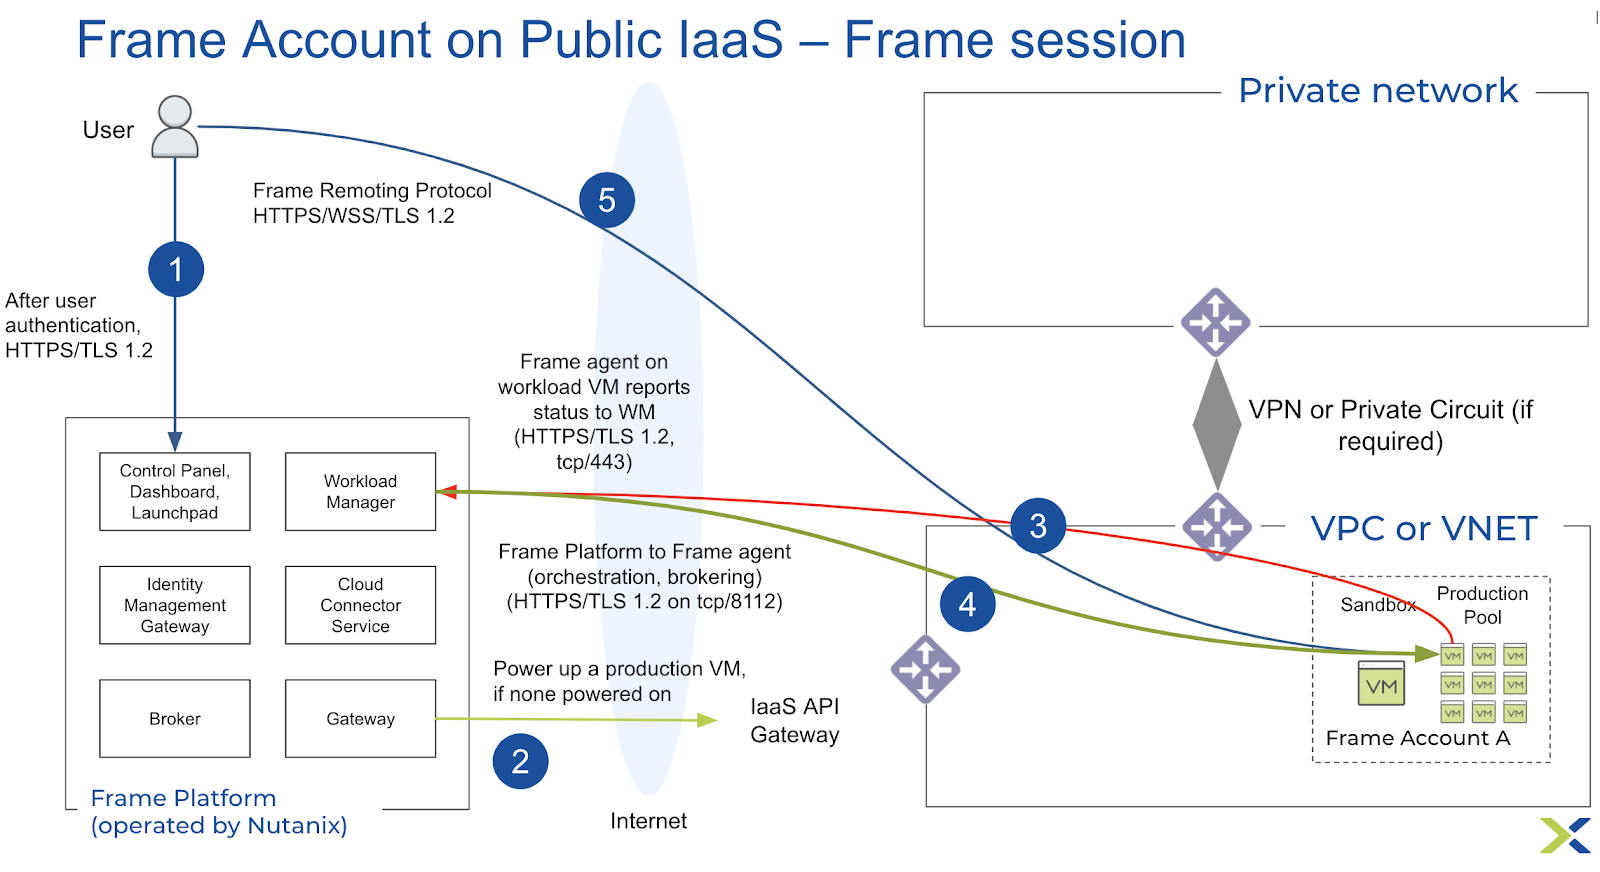 Figure 2. Frame Account Architecture with Public IP Addresses